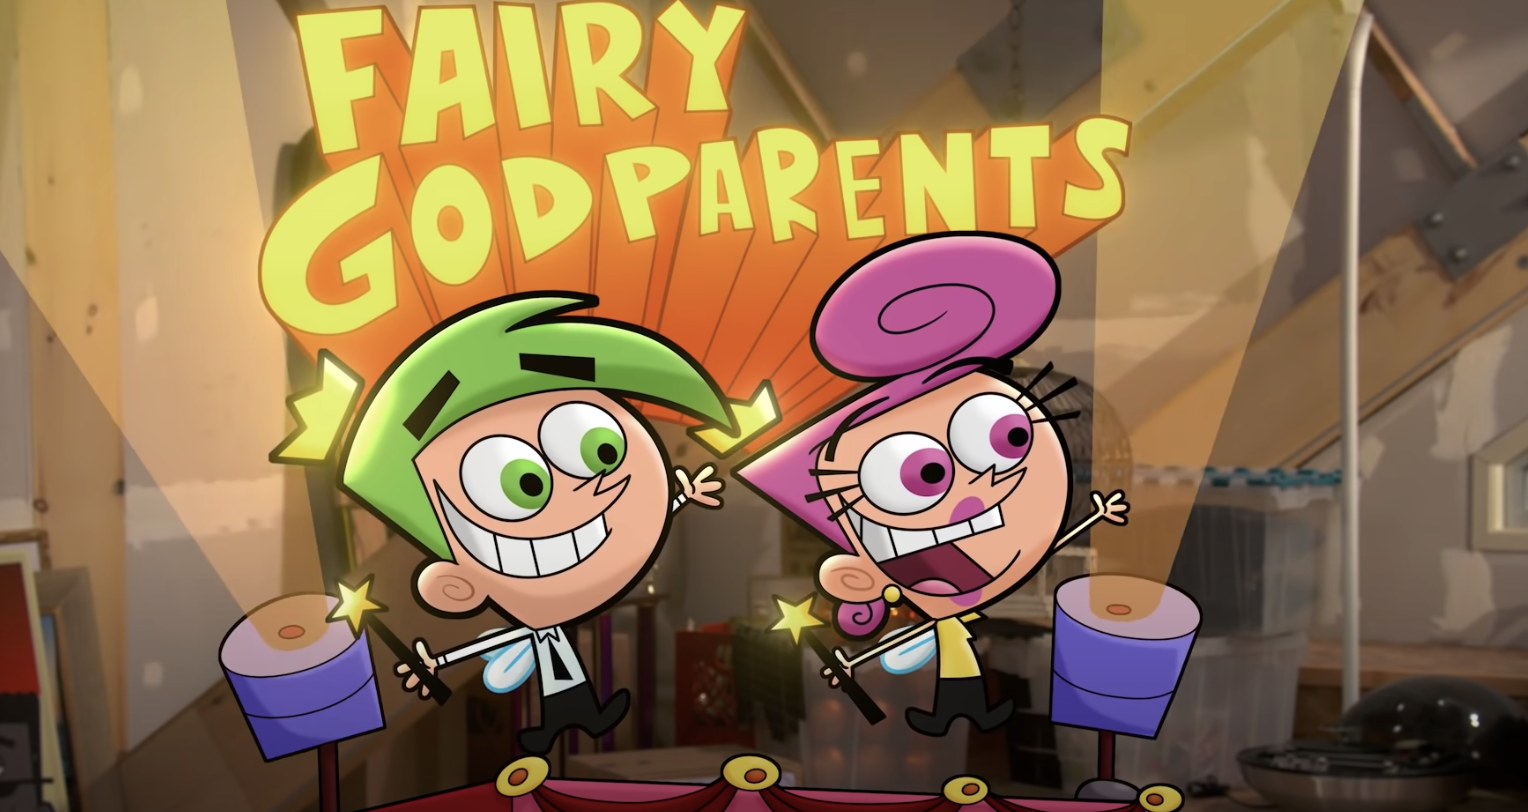 Fairly oddparents action packed